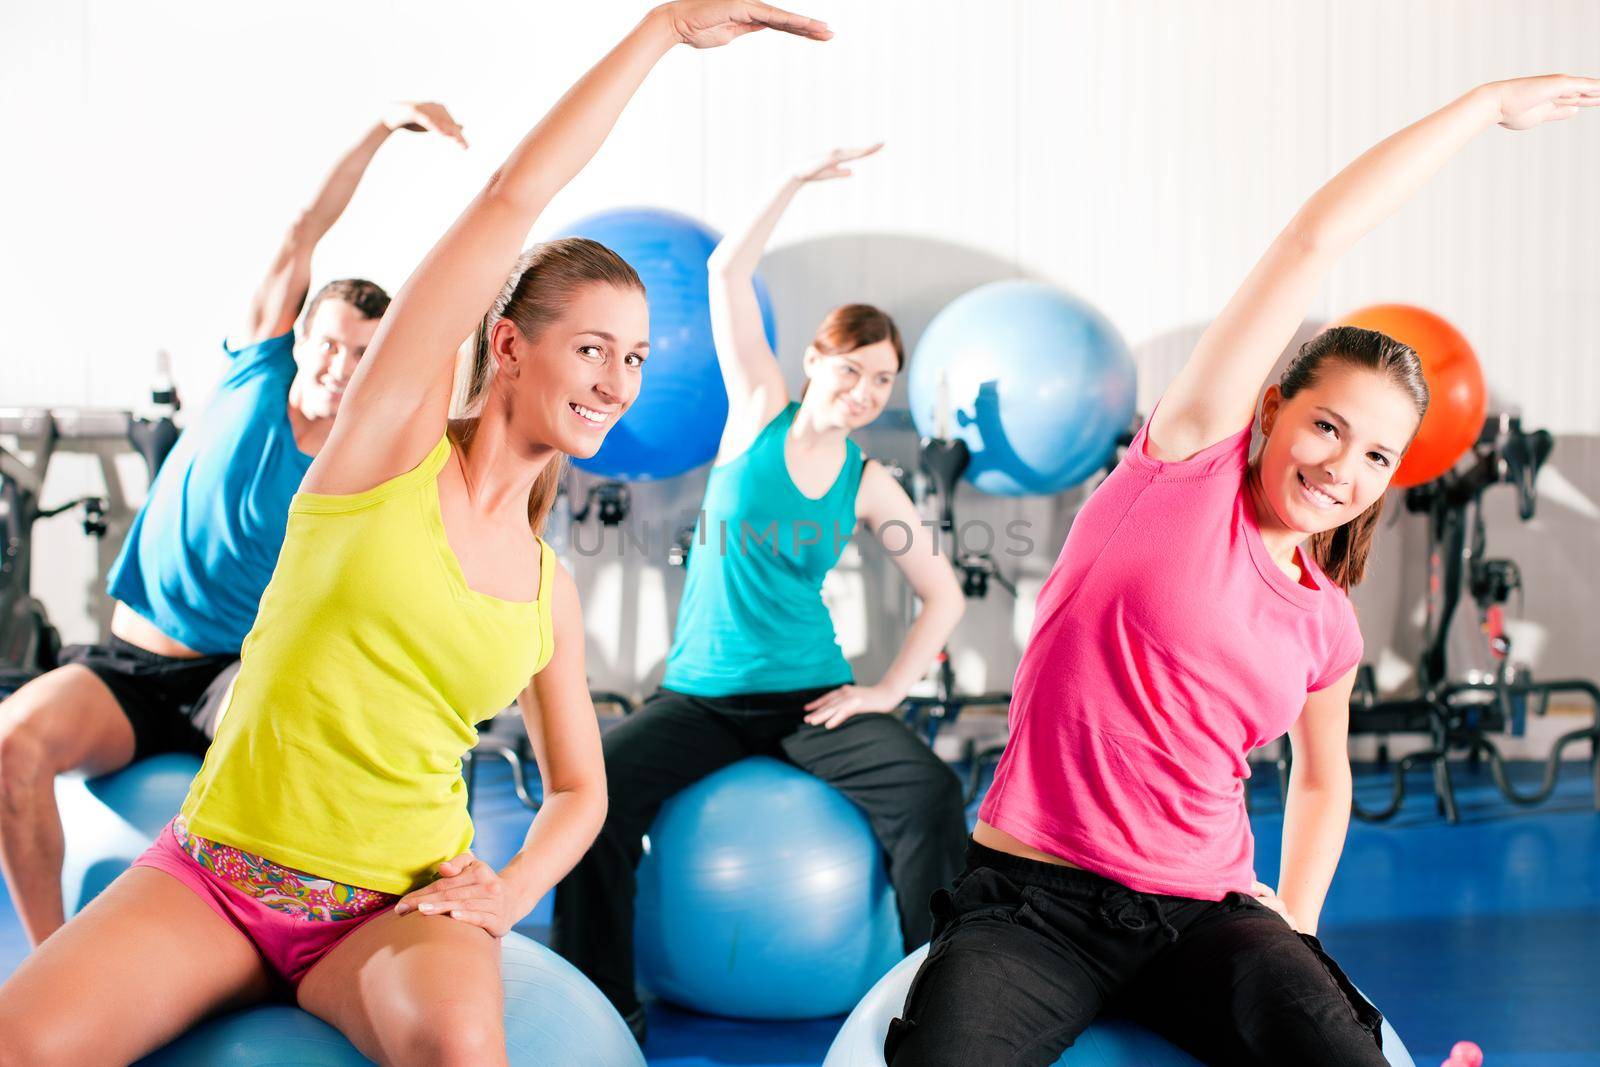 Four people - man and women - in the gym doing gymnastics on an exercise ball